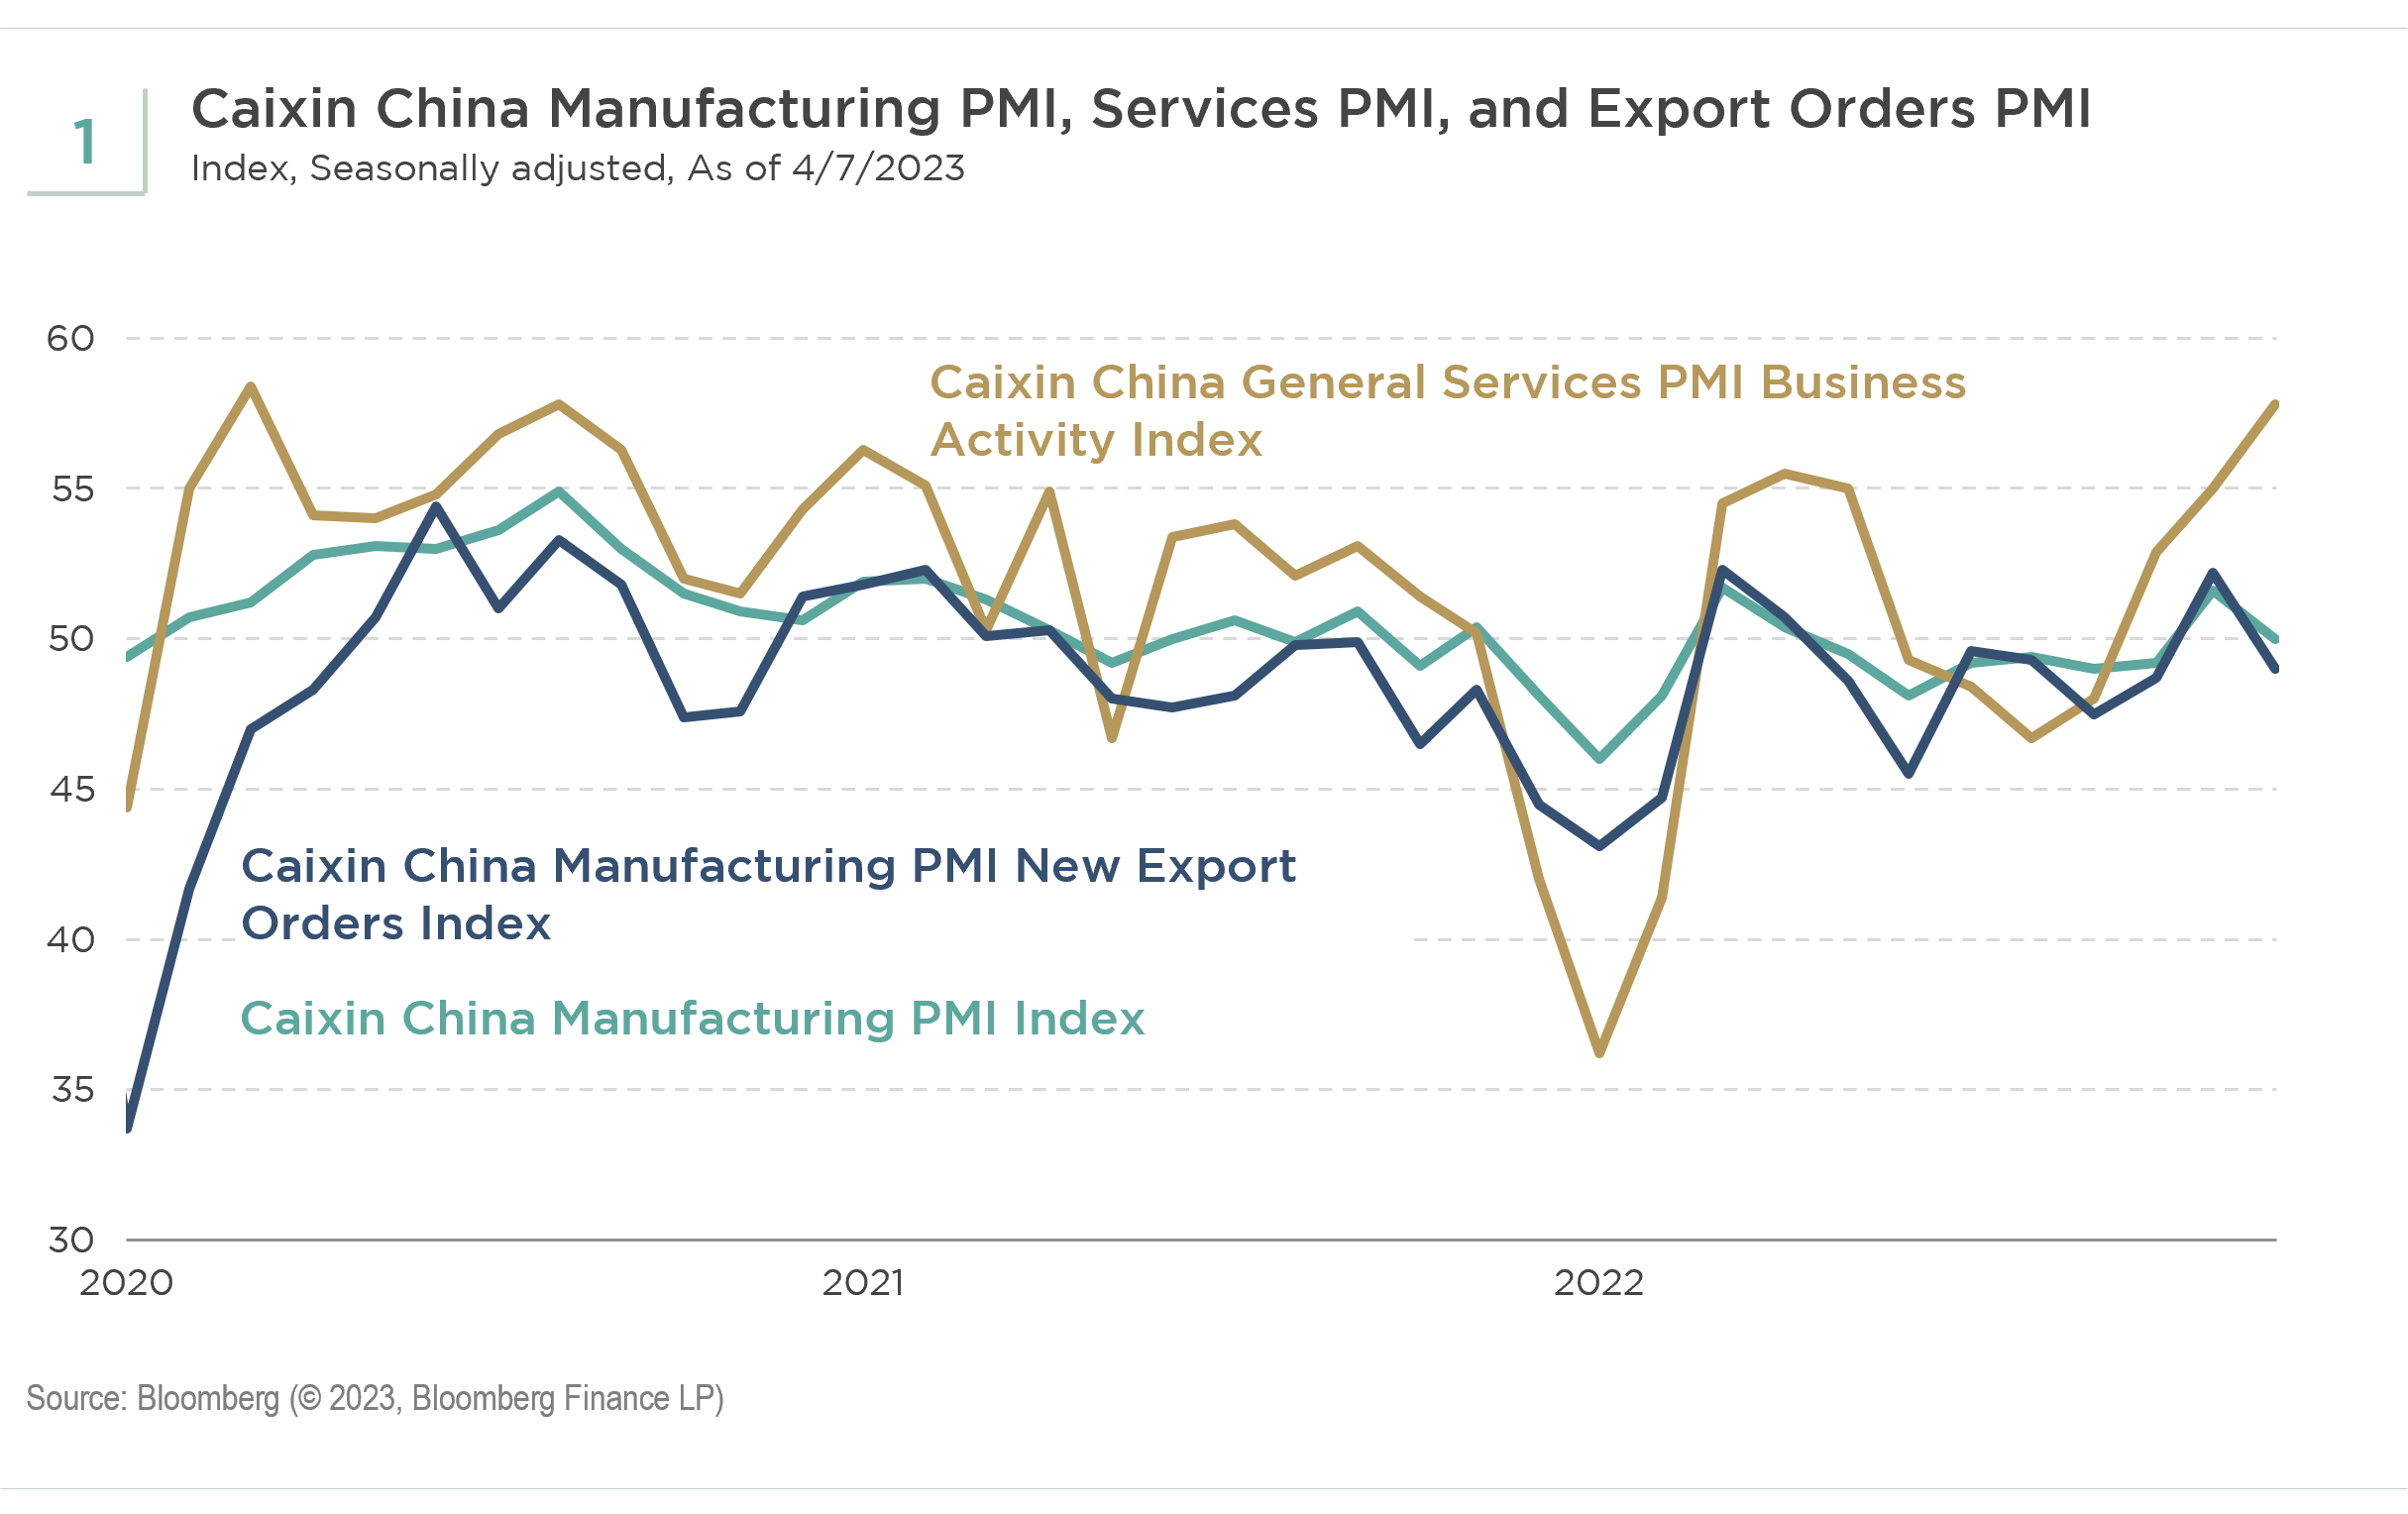 Exhibit 1: China Caixin Manufacturing PMI, Services PMI and export order PMI, as of 4/7/2023